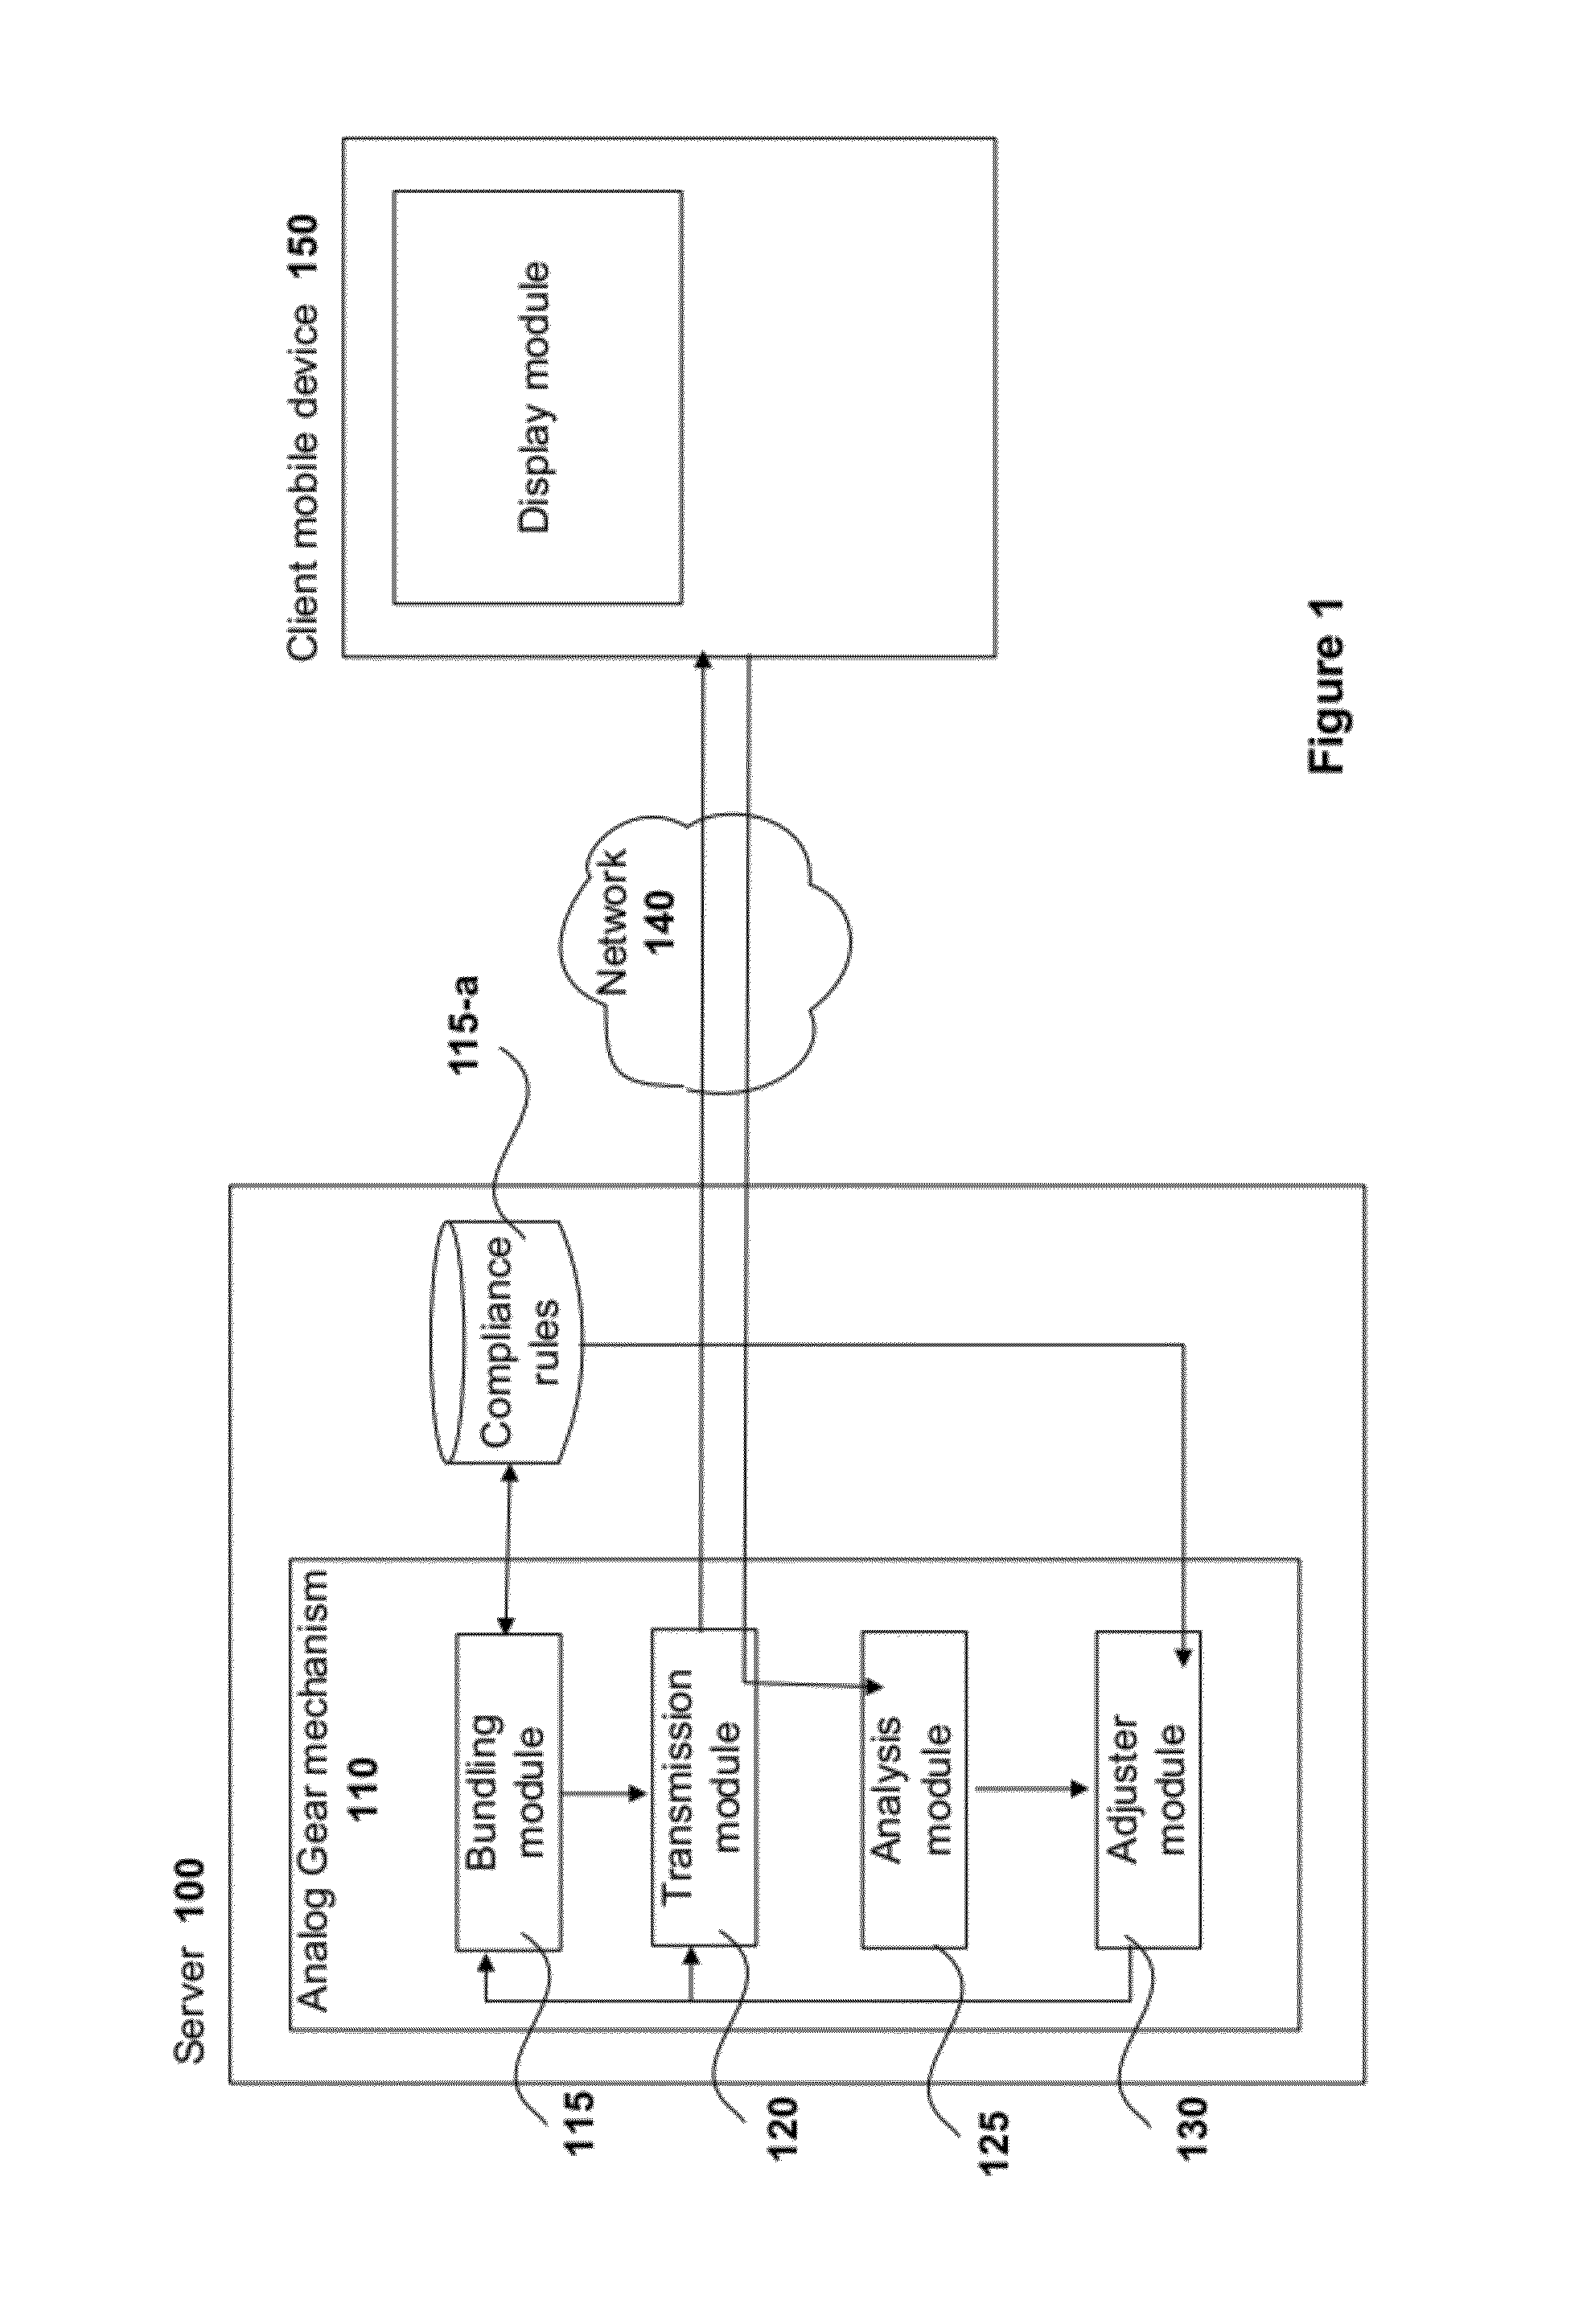 Methods and Apparatus for Using a Layered Gear to Analyze and Manage Real-time Network Quality of Service Transmission for Mobile Devices on Public Networks